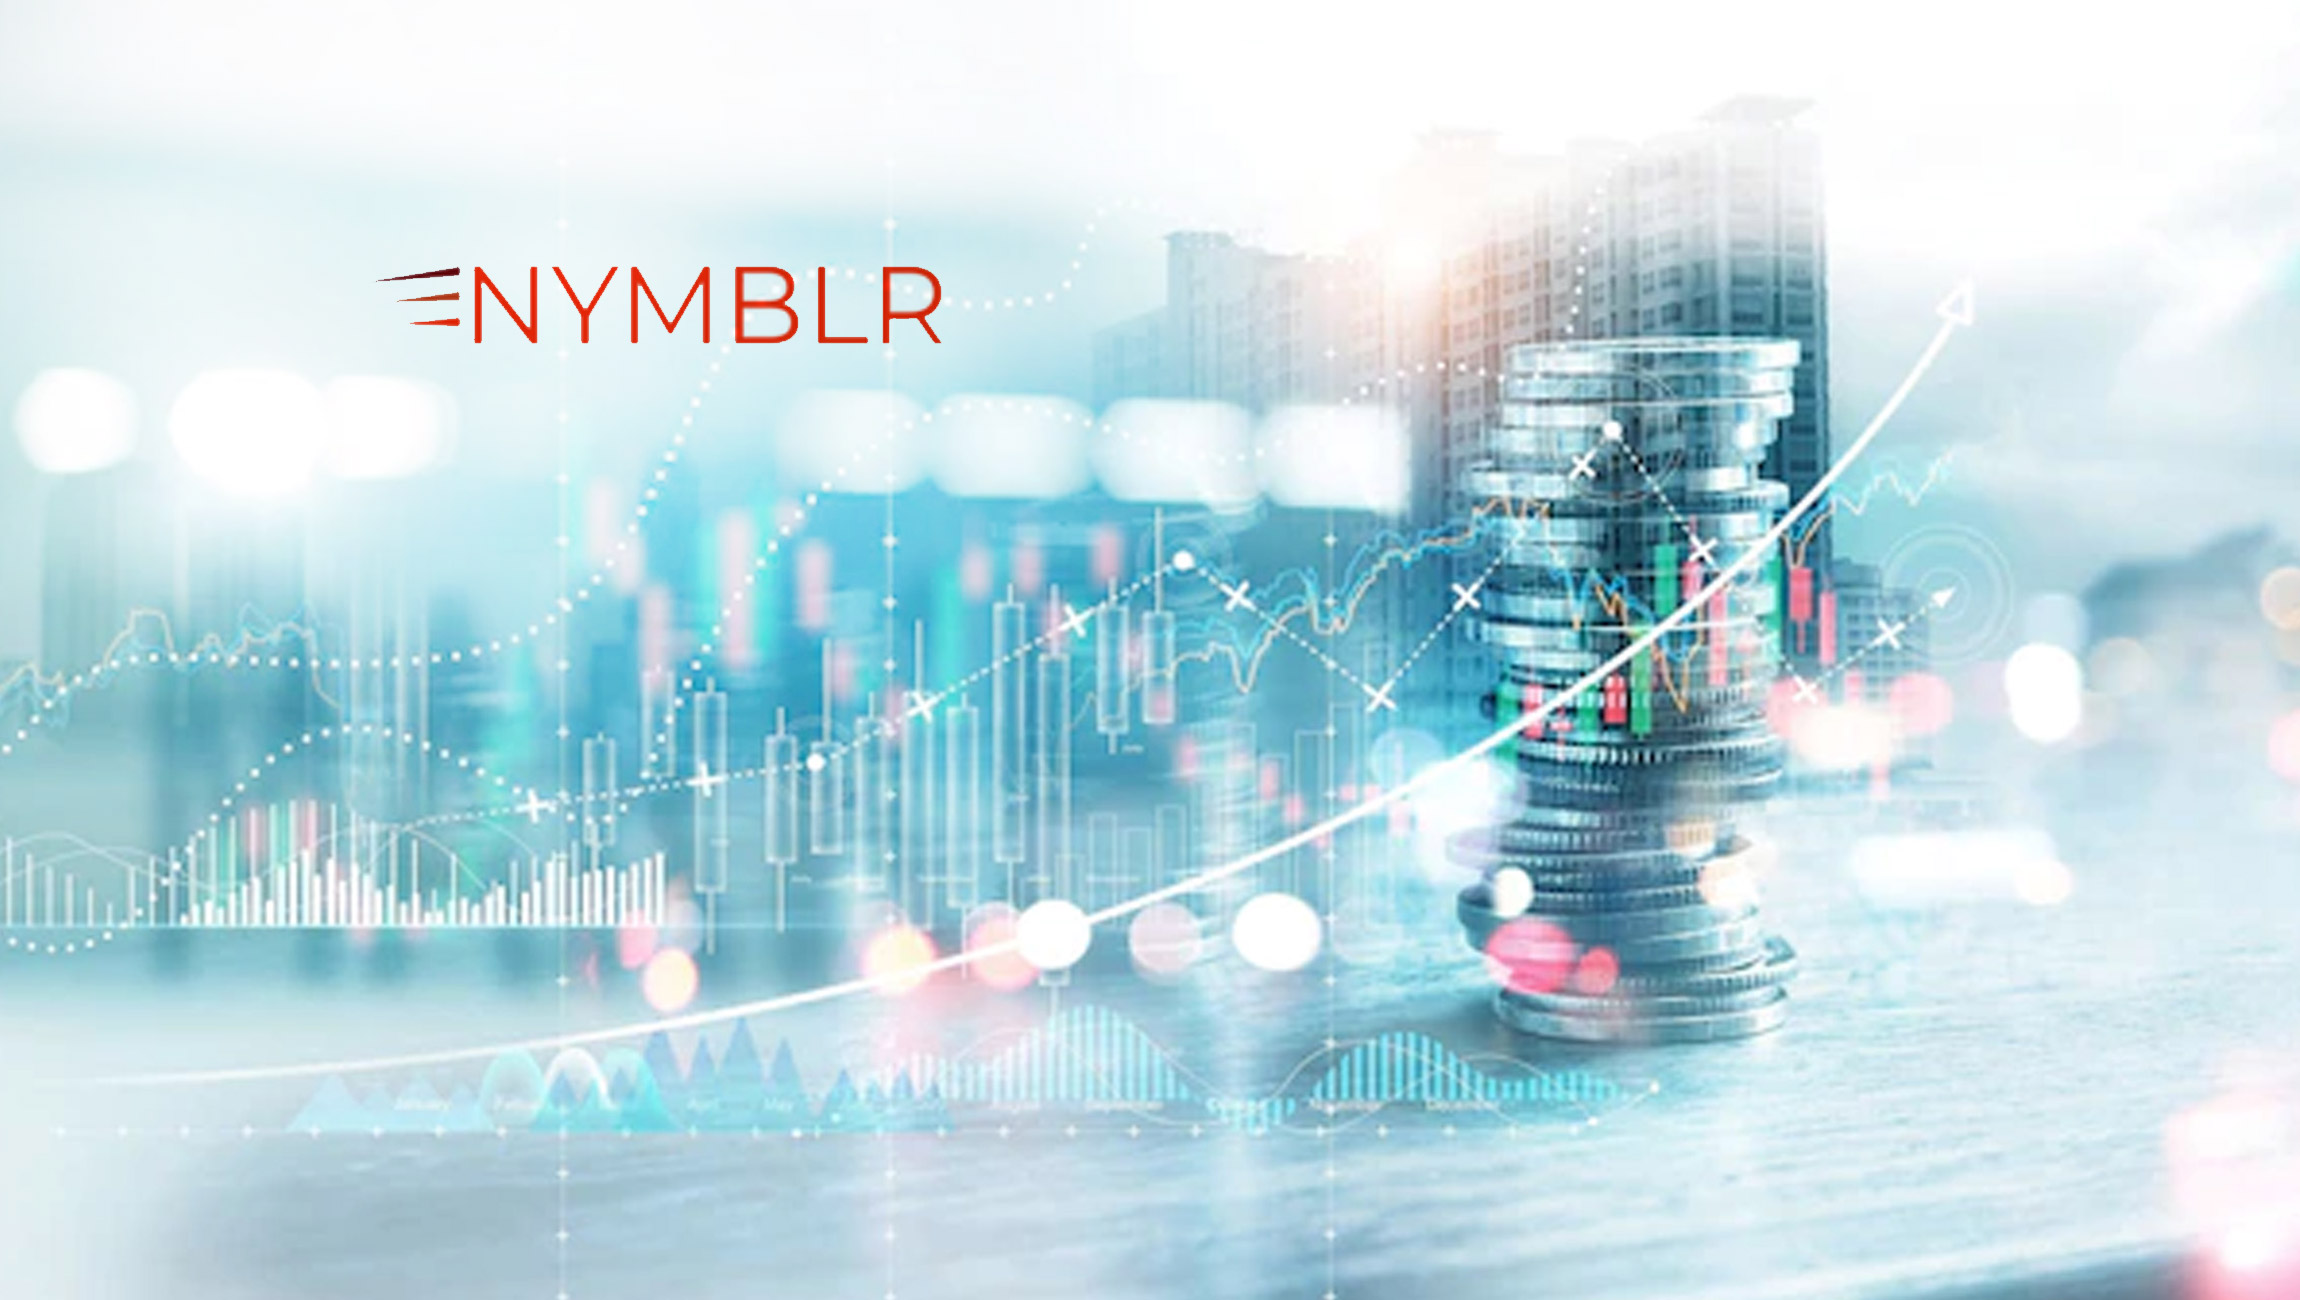 Nymblr, Innovative B2B Data Platform for Sales and Marketing, Poised to Grow After Funding Round Led by Alegian